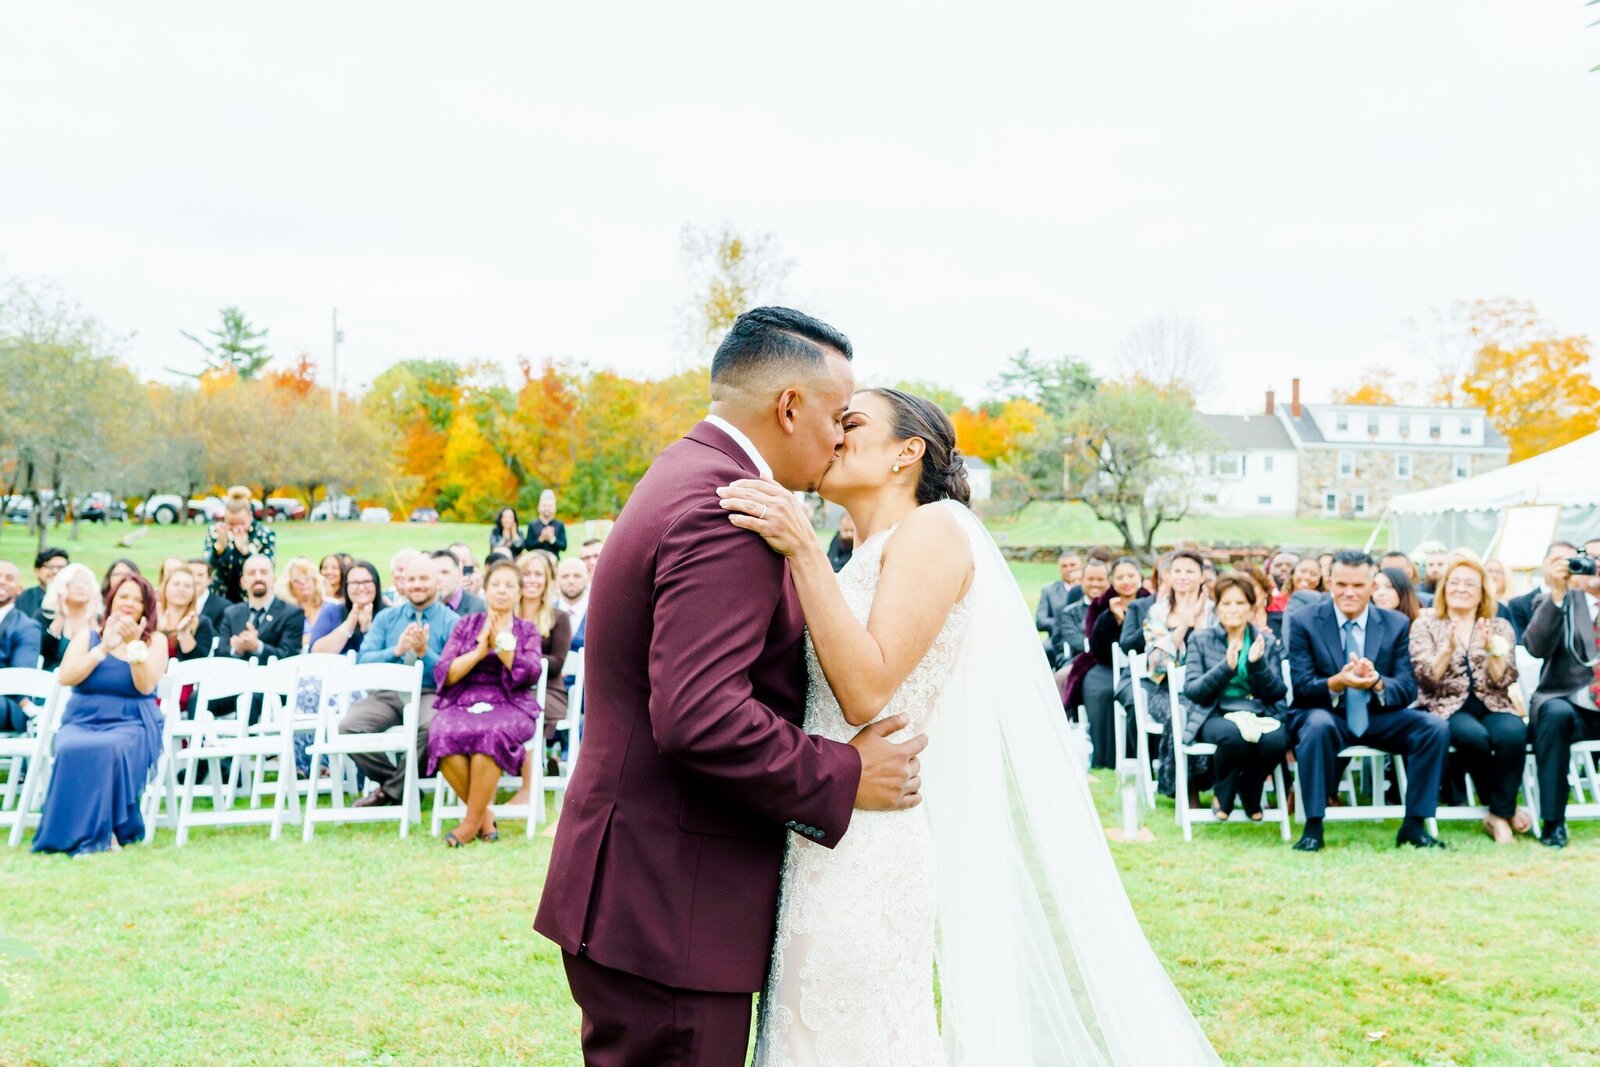 Bride and groom kissing at New Hampshire wedding ceremony